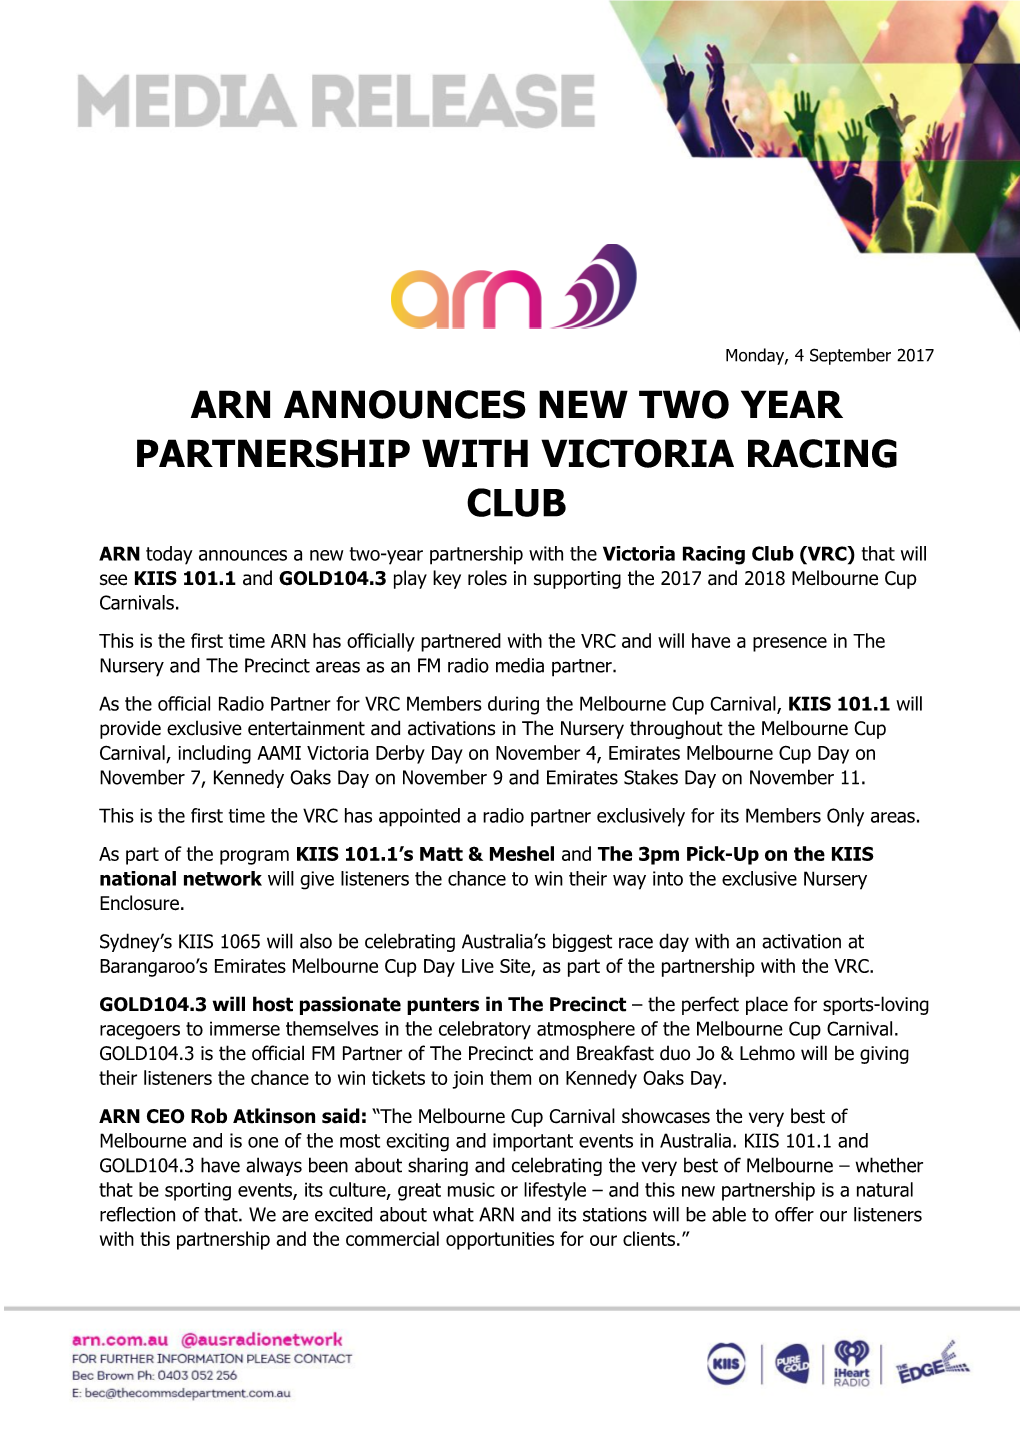 Arn Announces New Two Year Partnership with Victoria Racing Club